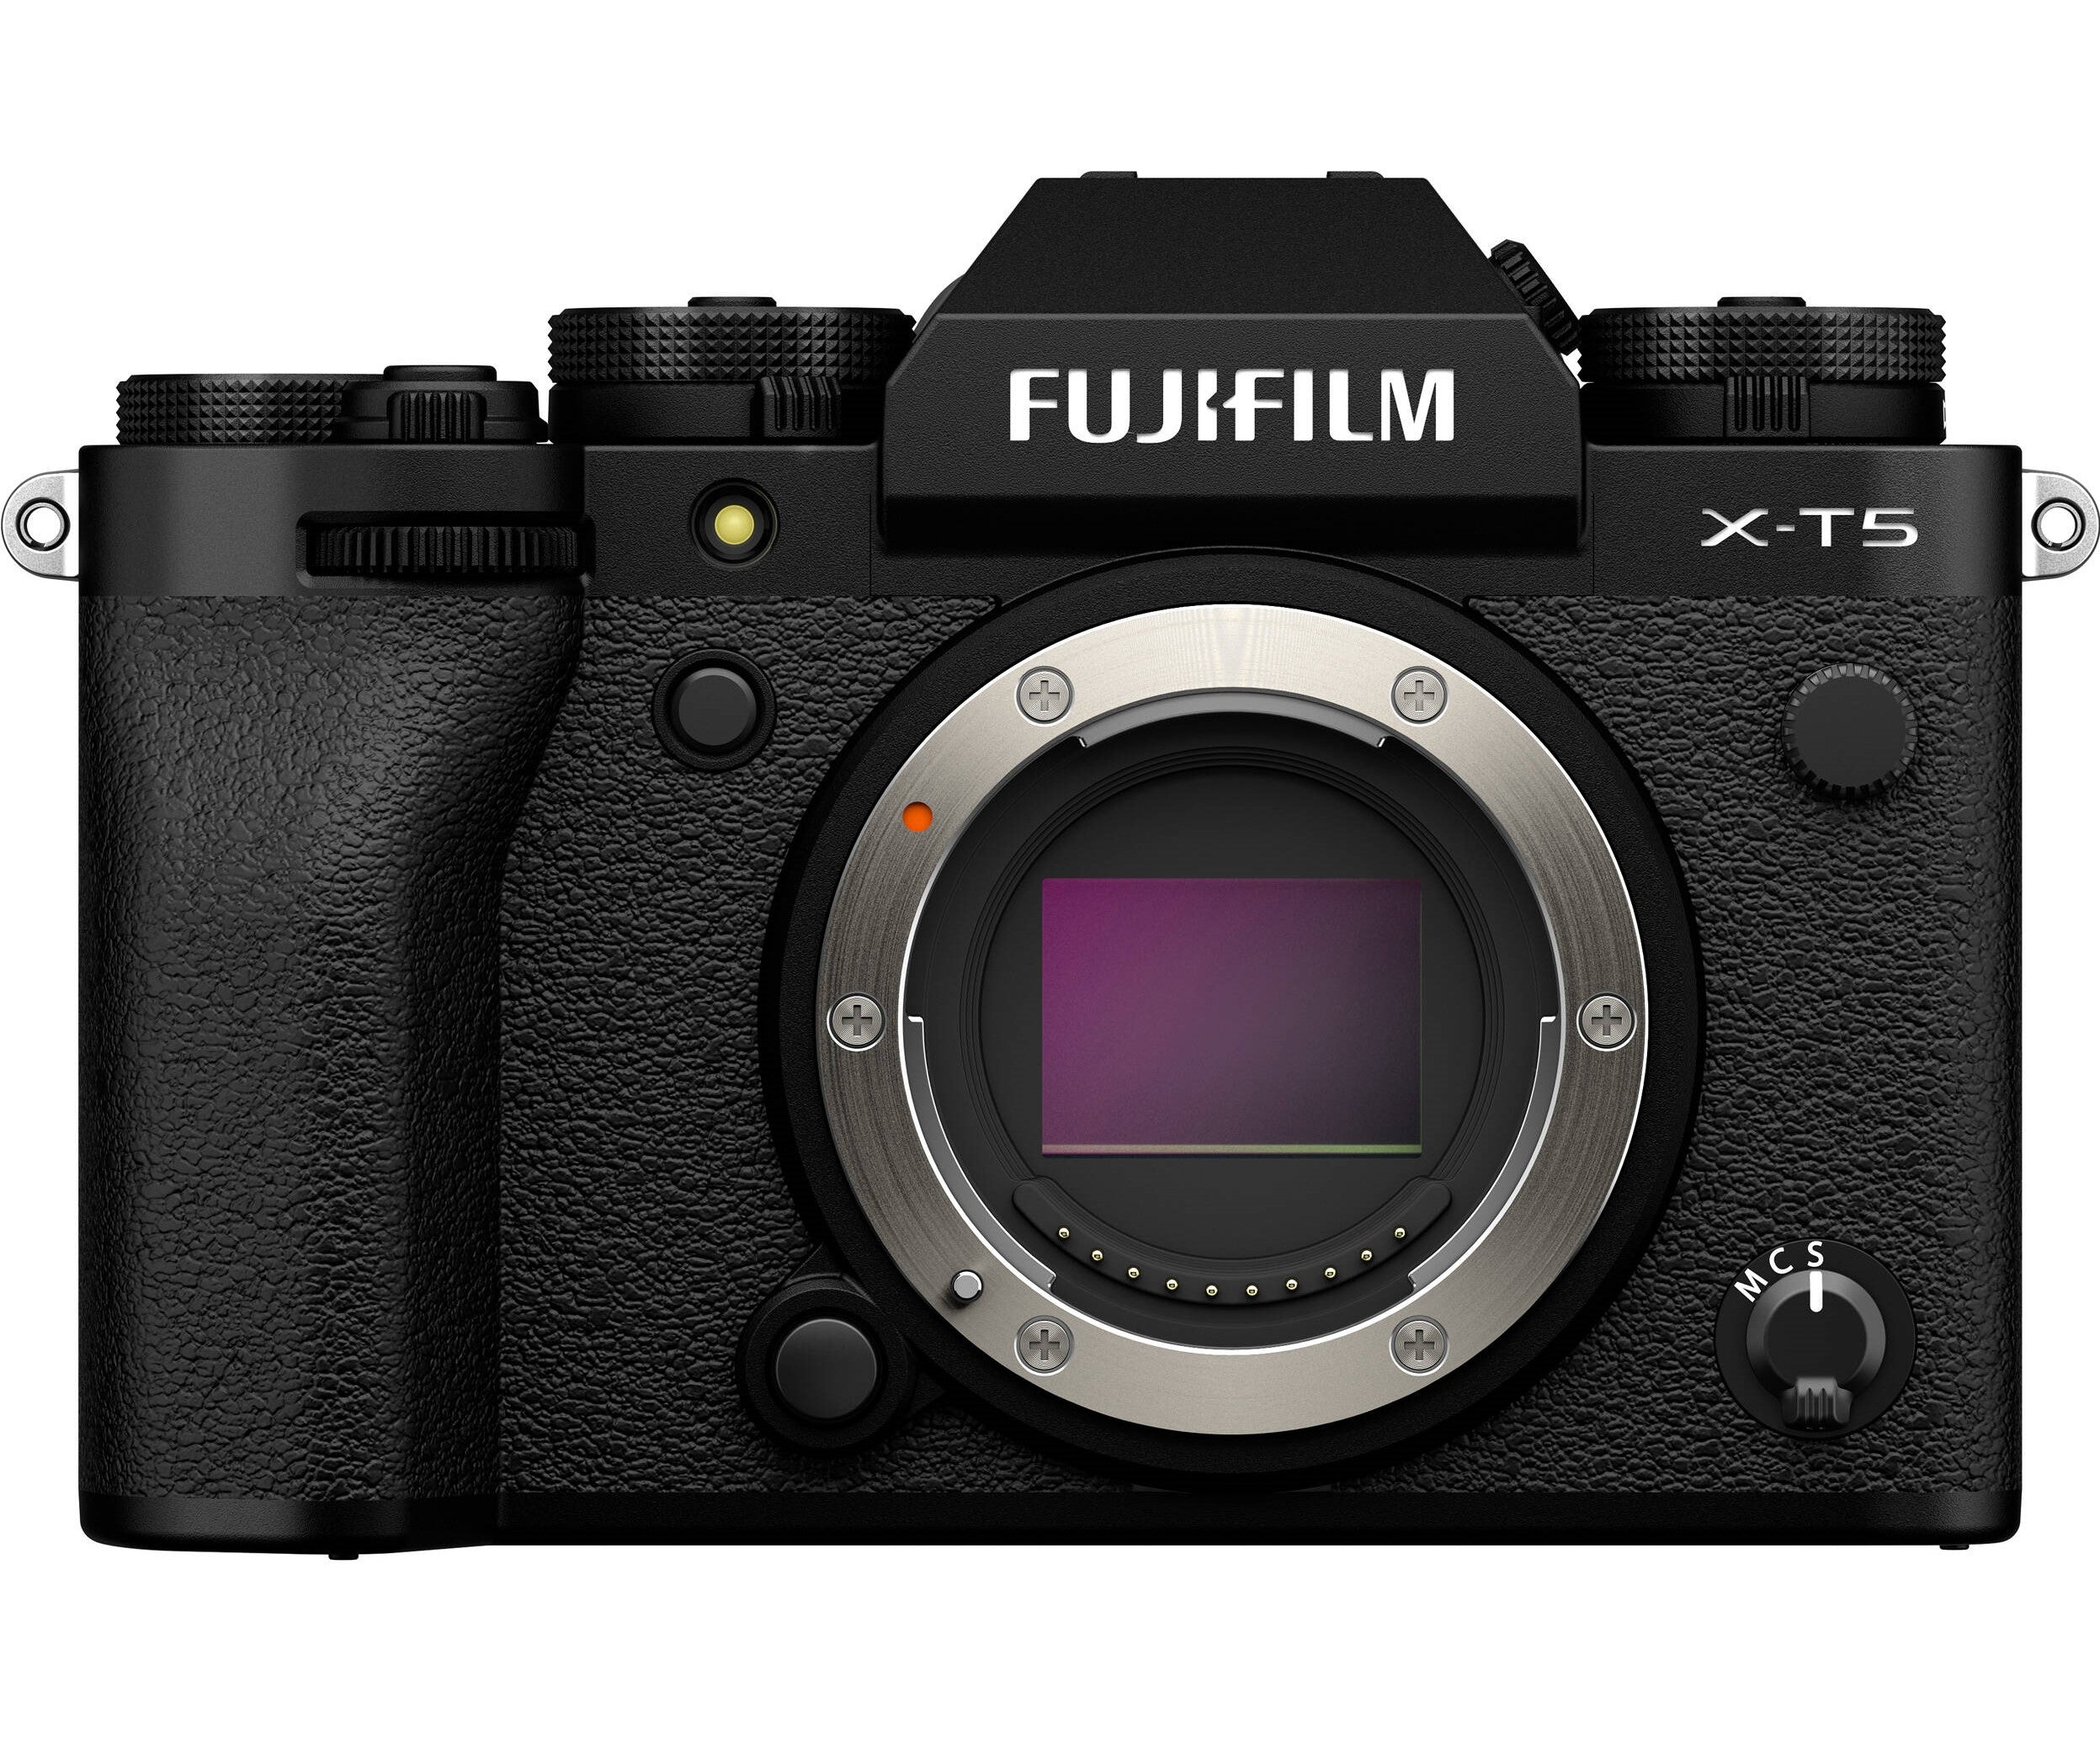 The New Fujifilm X-T5 Has Arrived